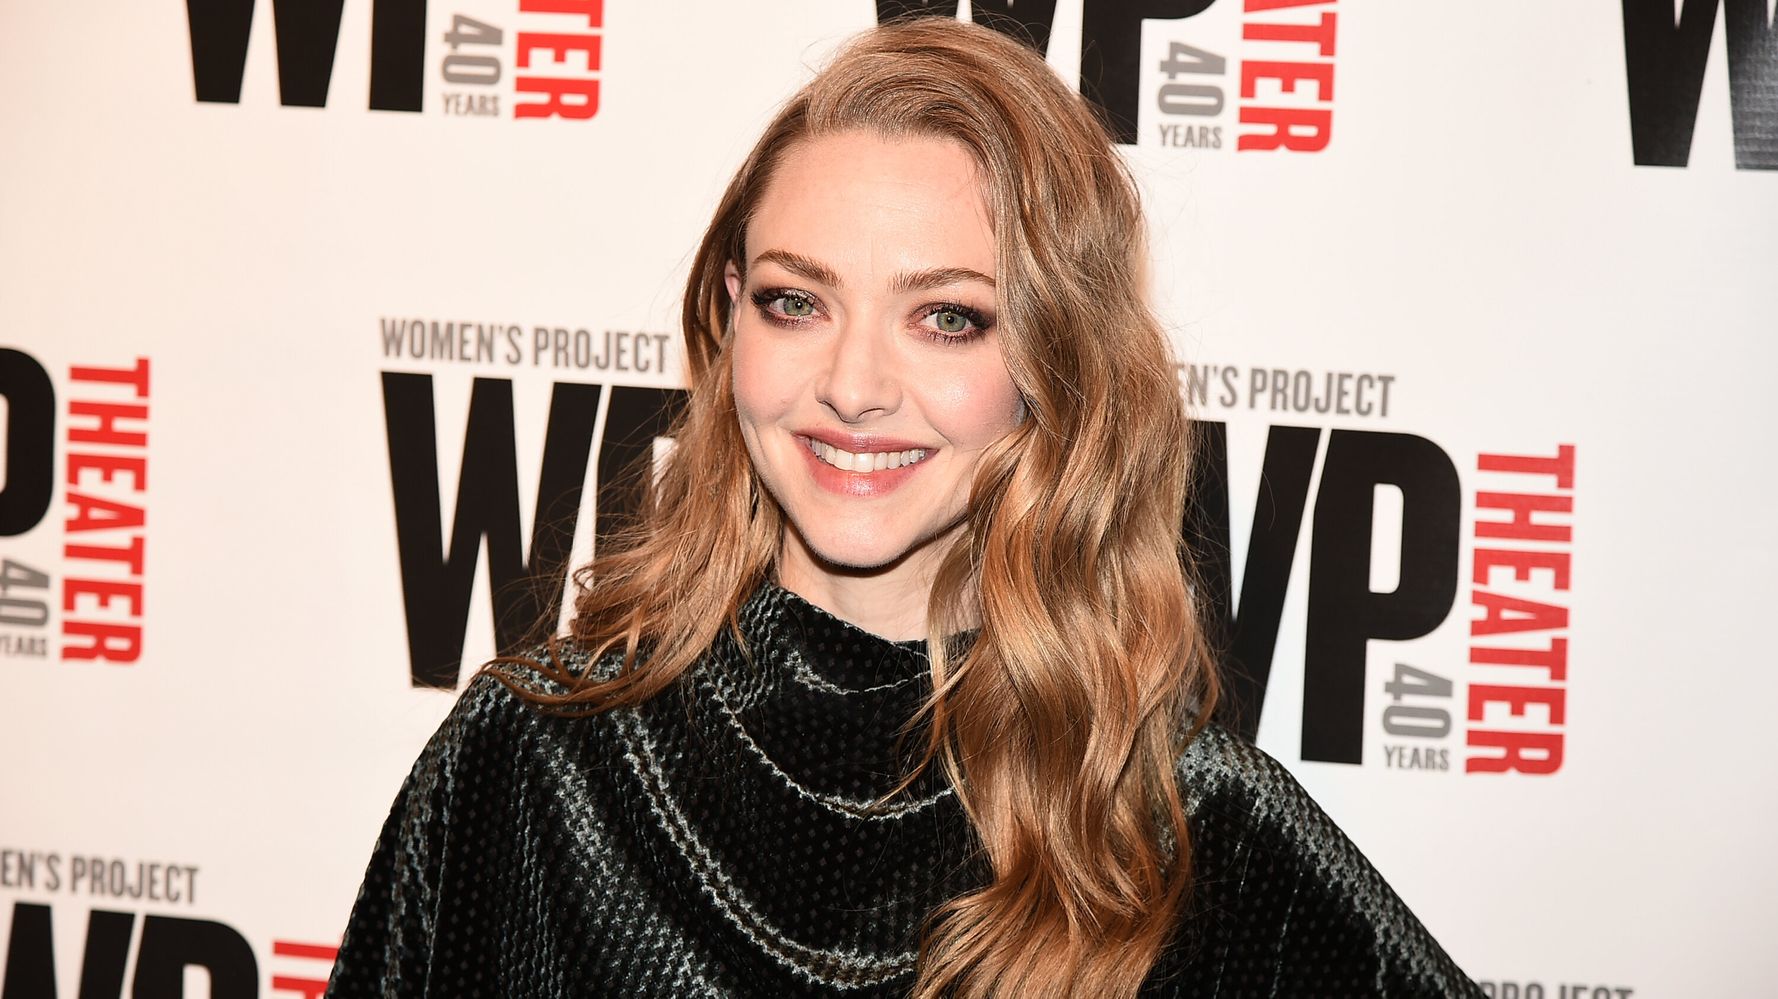 11 Thoughtful Quotes About Motherhood From Amanda Seyfried